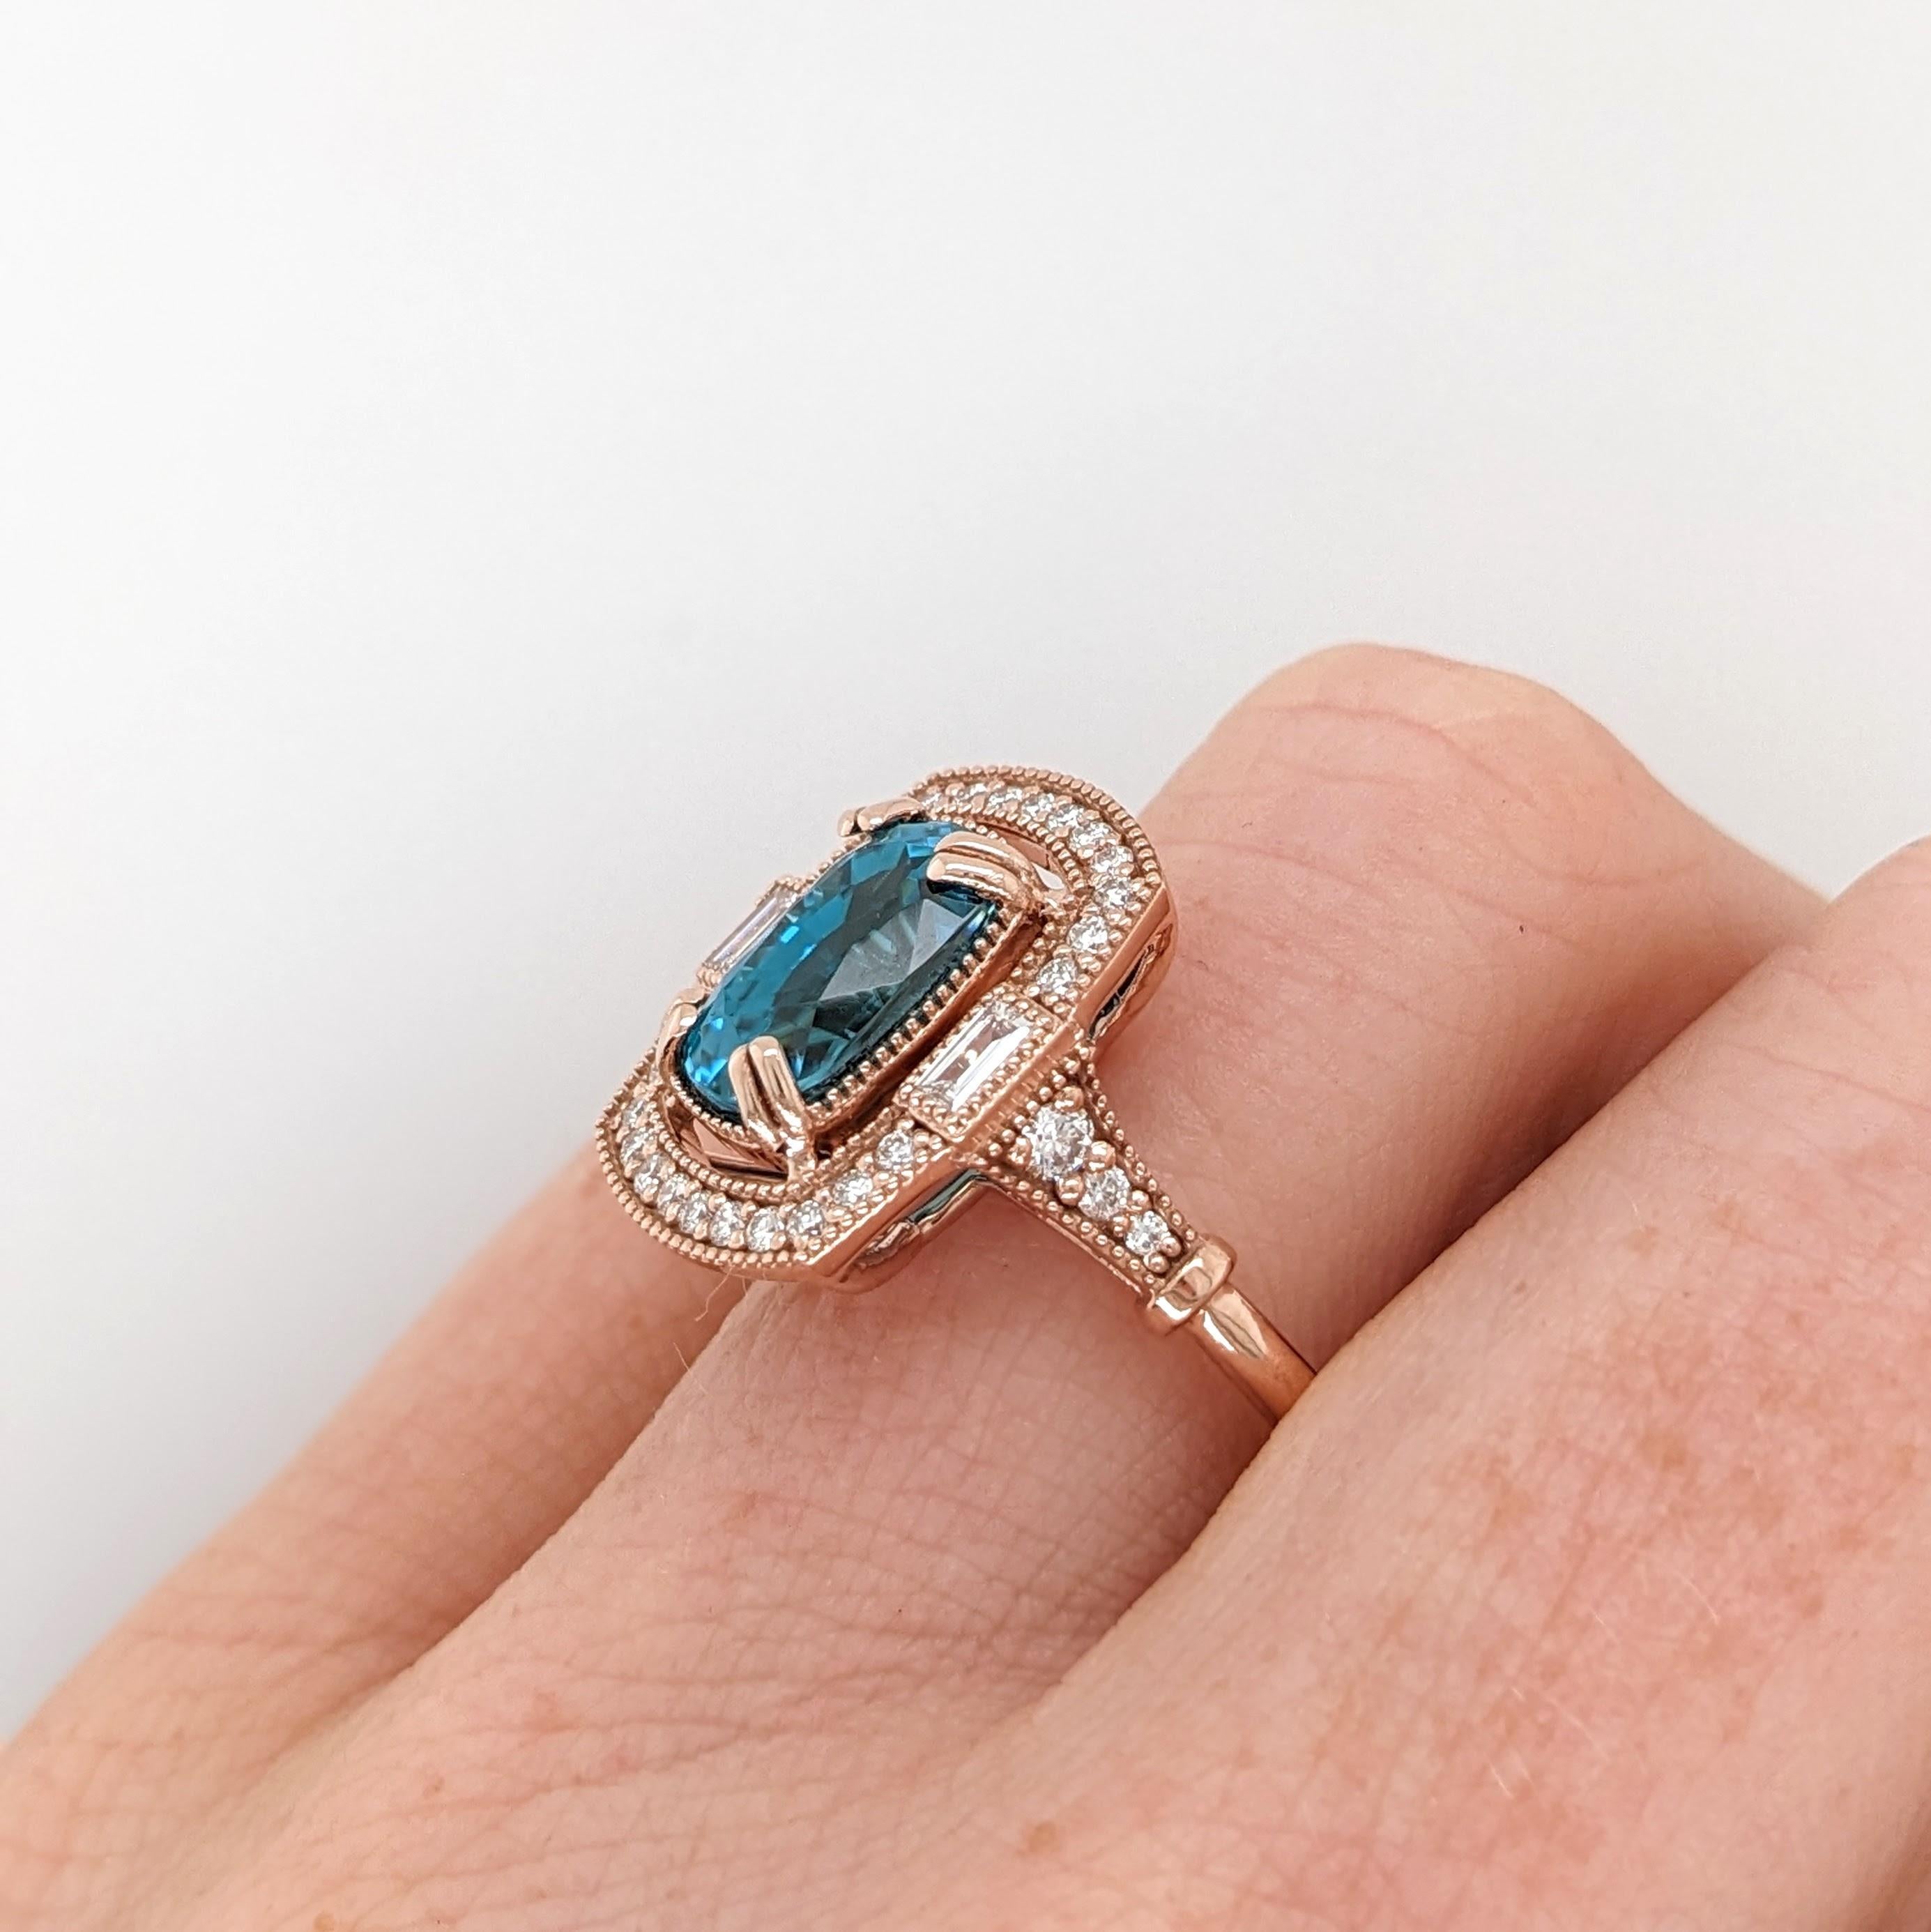 Art Deco 5.4ct Blue Zircon Ring w Earth Mined Diamonds in Solid 14K Rose Gold CU 10x7mm For Sale